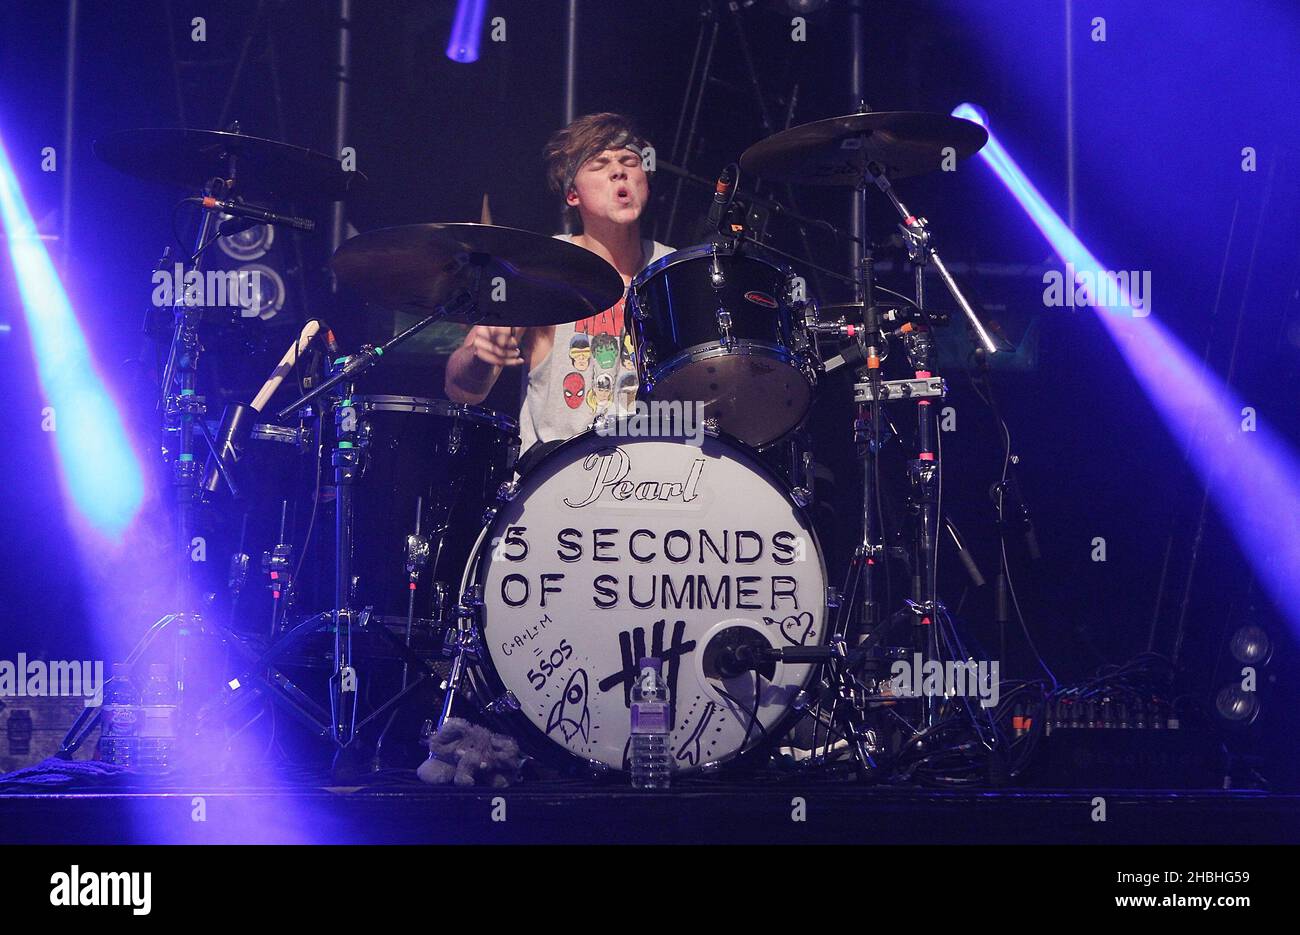 Ashton Irwin of 5 Seconds of Summer performs at the 02 Shepherd's Bush Empire in London. Stock Photo